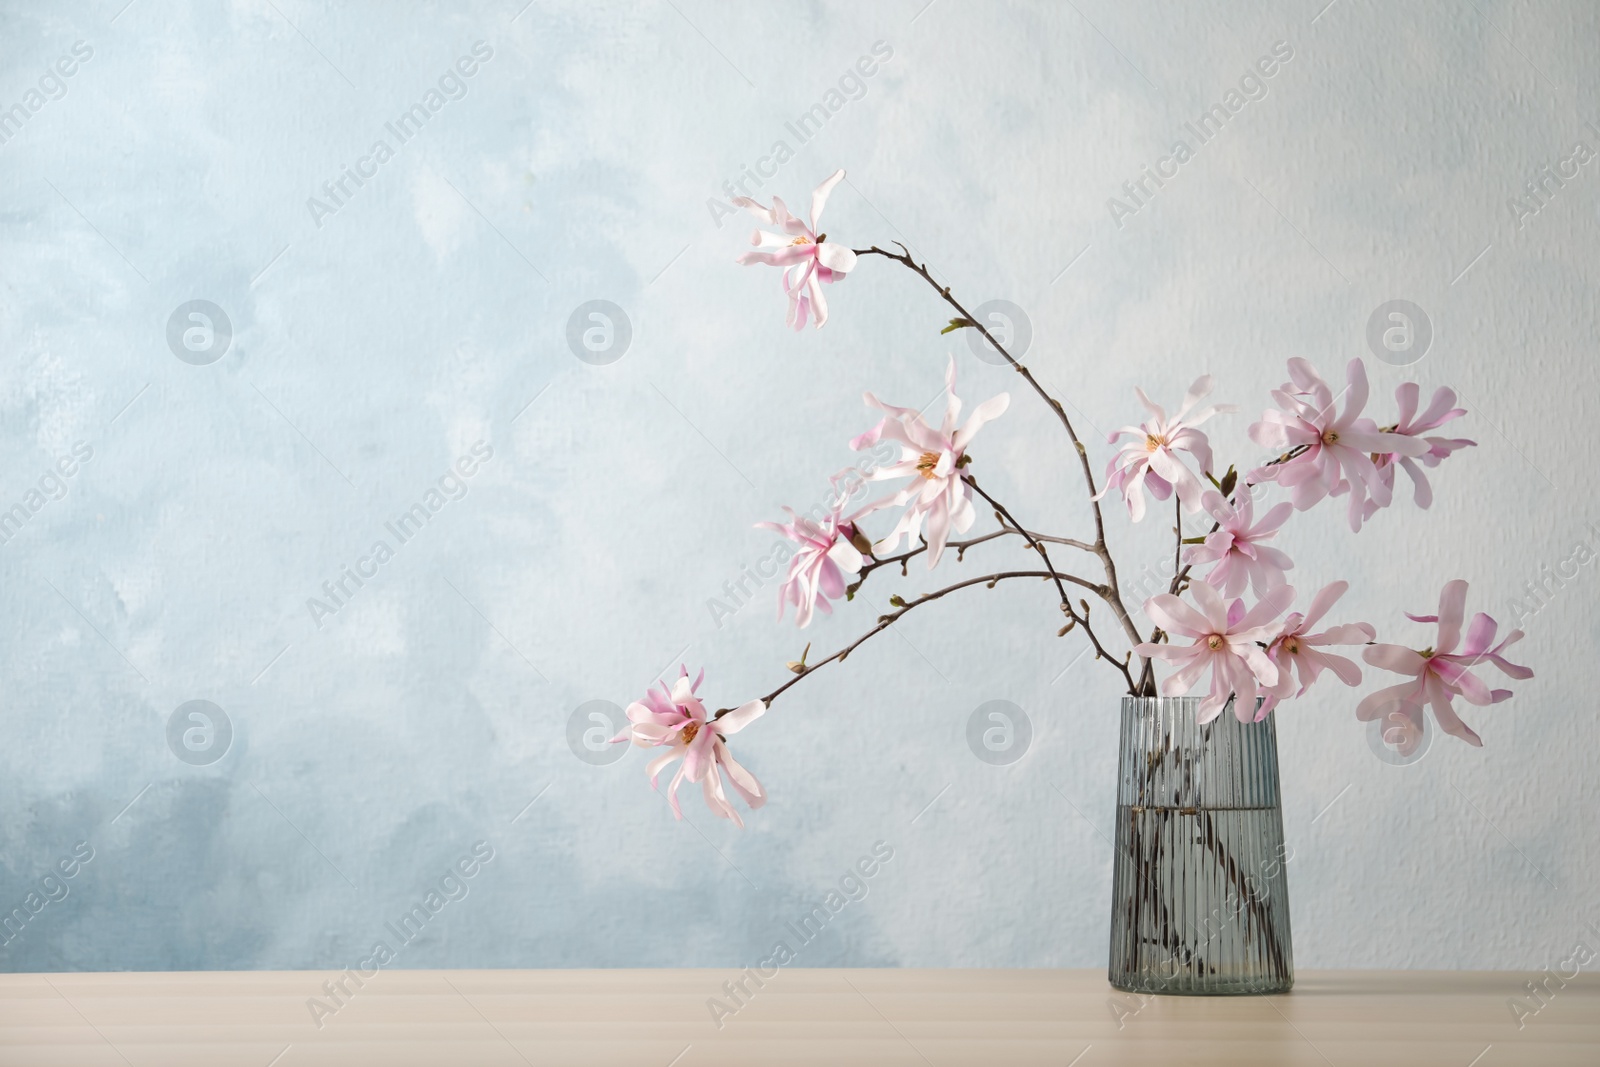 Photo of Magnolia tree branches with beautiful flowers in glass vase on wooden table against light blue background, space for text